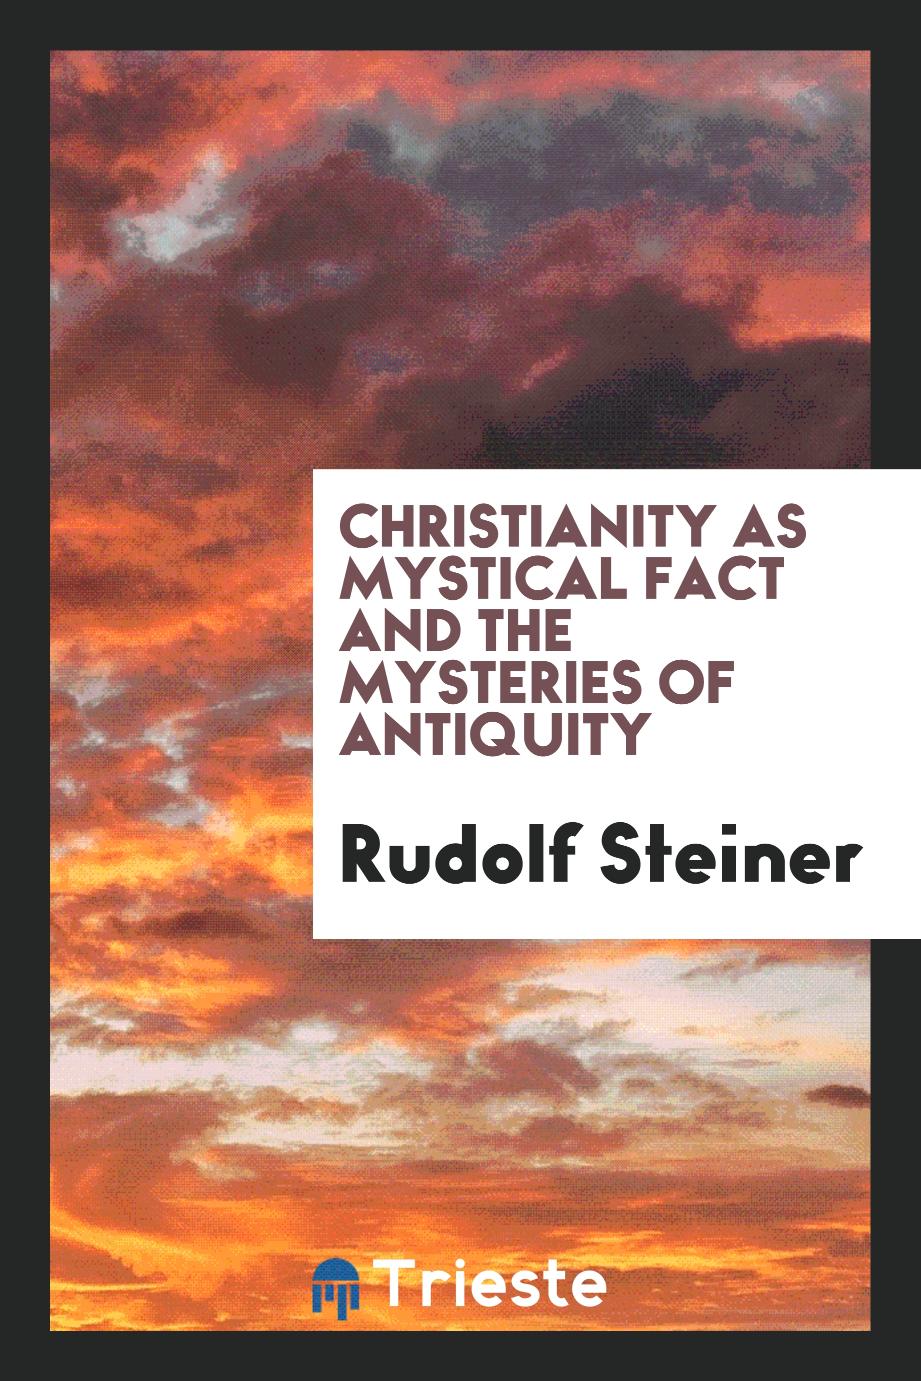 Christianity as mystical fact and the mysteries of antiquity